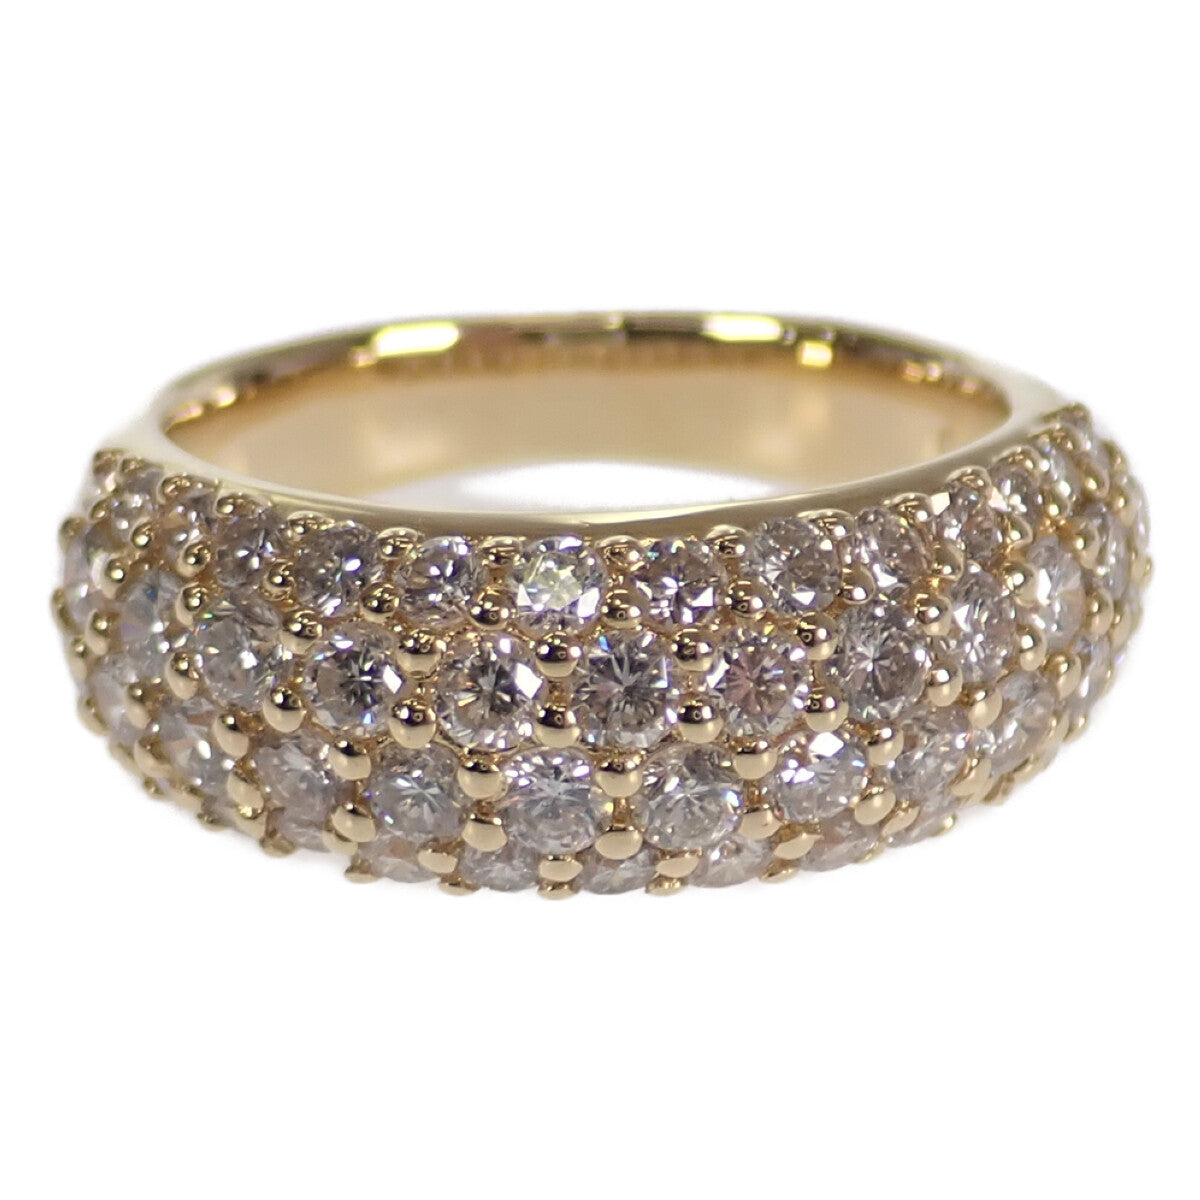 [LuxUness]  K18YG Pave Ring D1.50ct - Gold & Diamond Elegance, Size 9 in Excellent condition